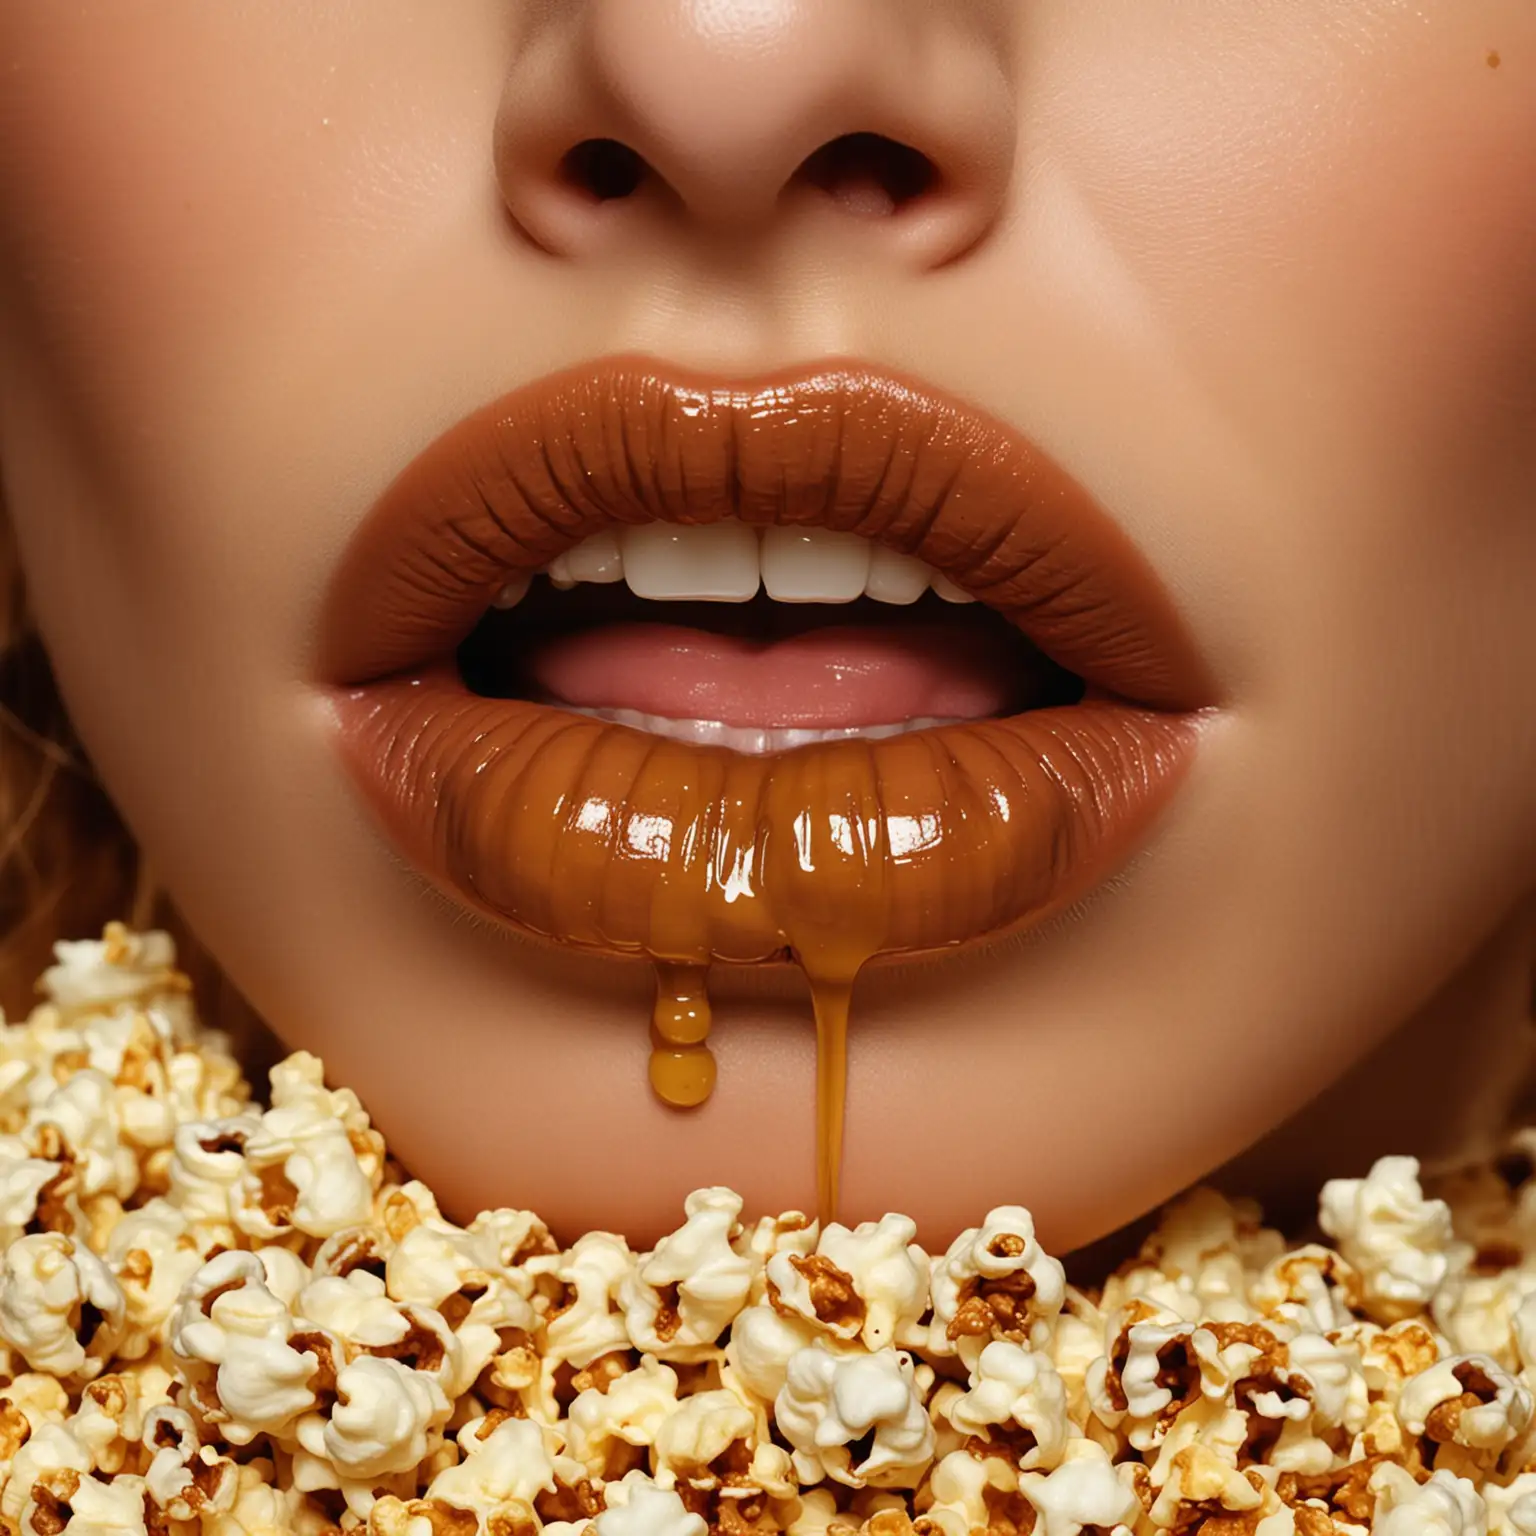 Mouthwatering-Caramel-Popcorn-Tempting-Lips-Dripping-with-Sweetness